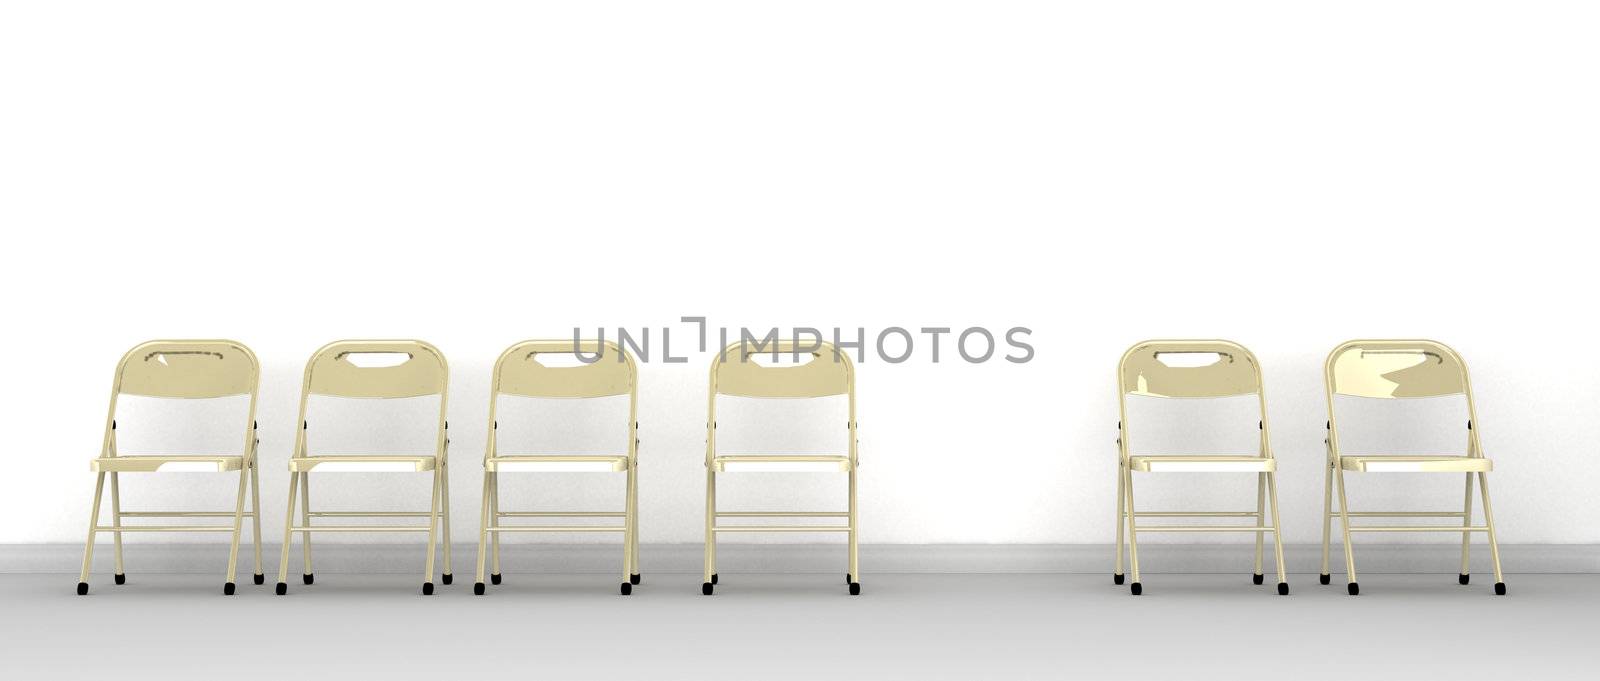 A row of metal chairs against a wall with one missing